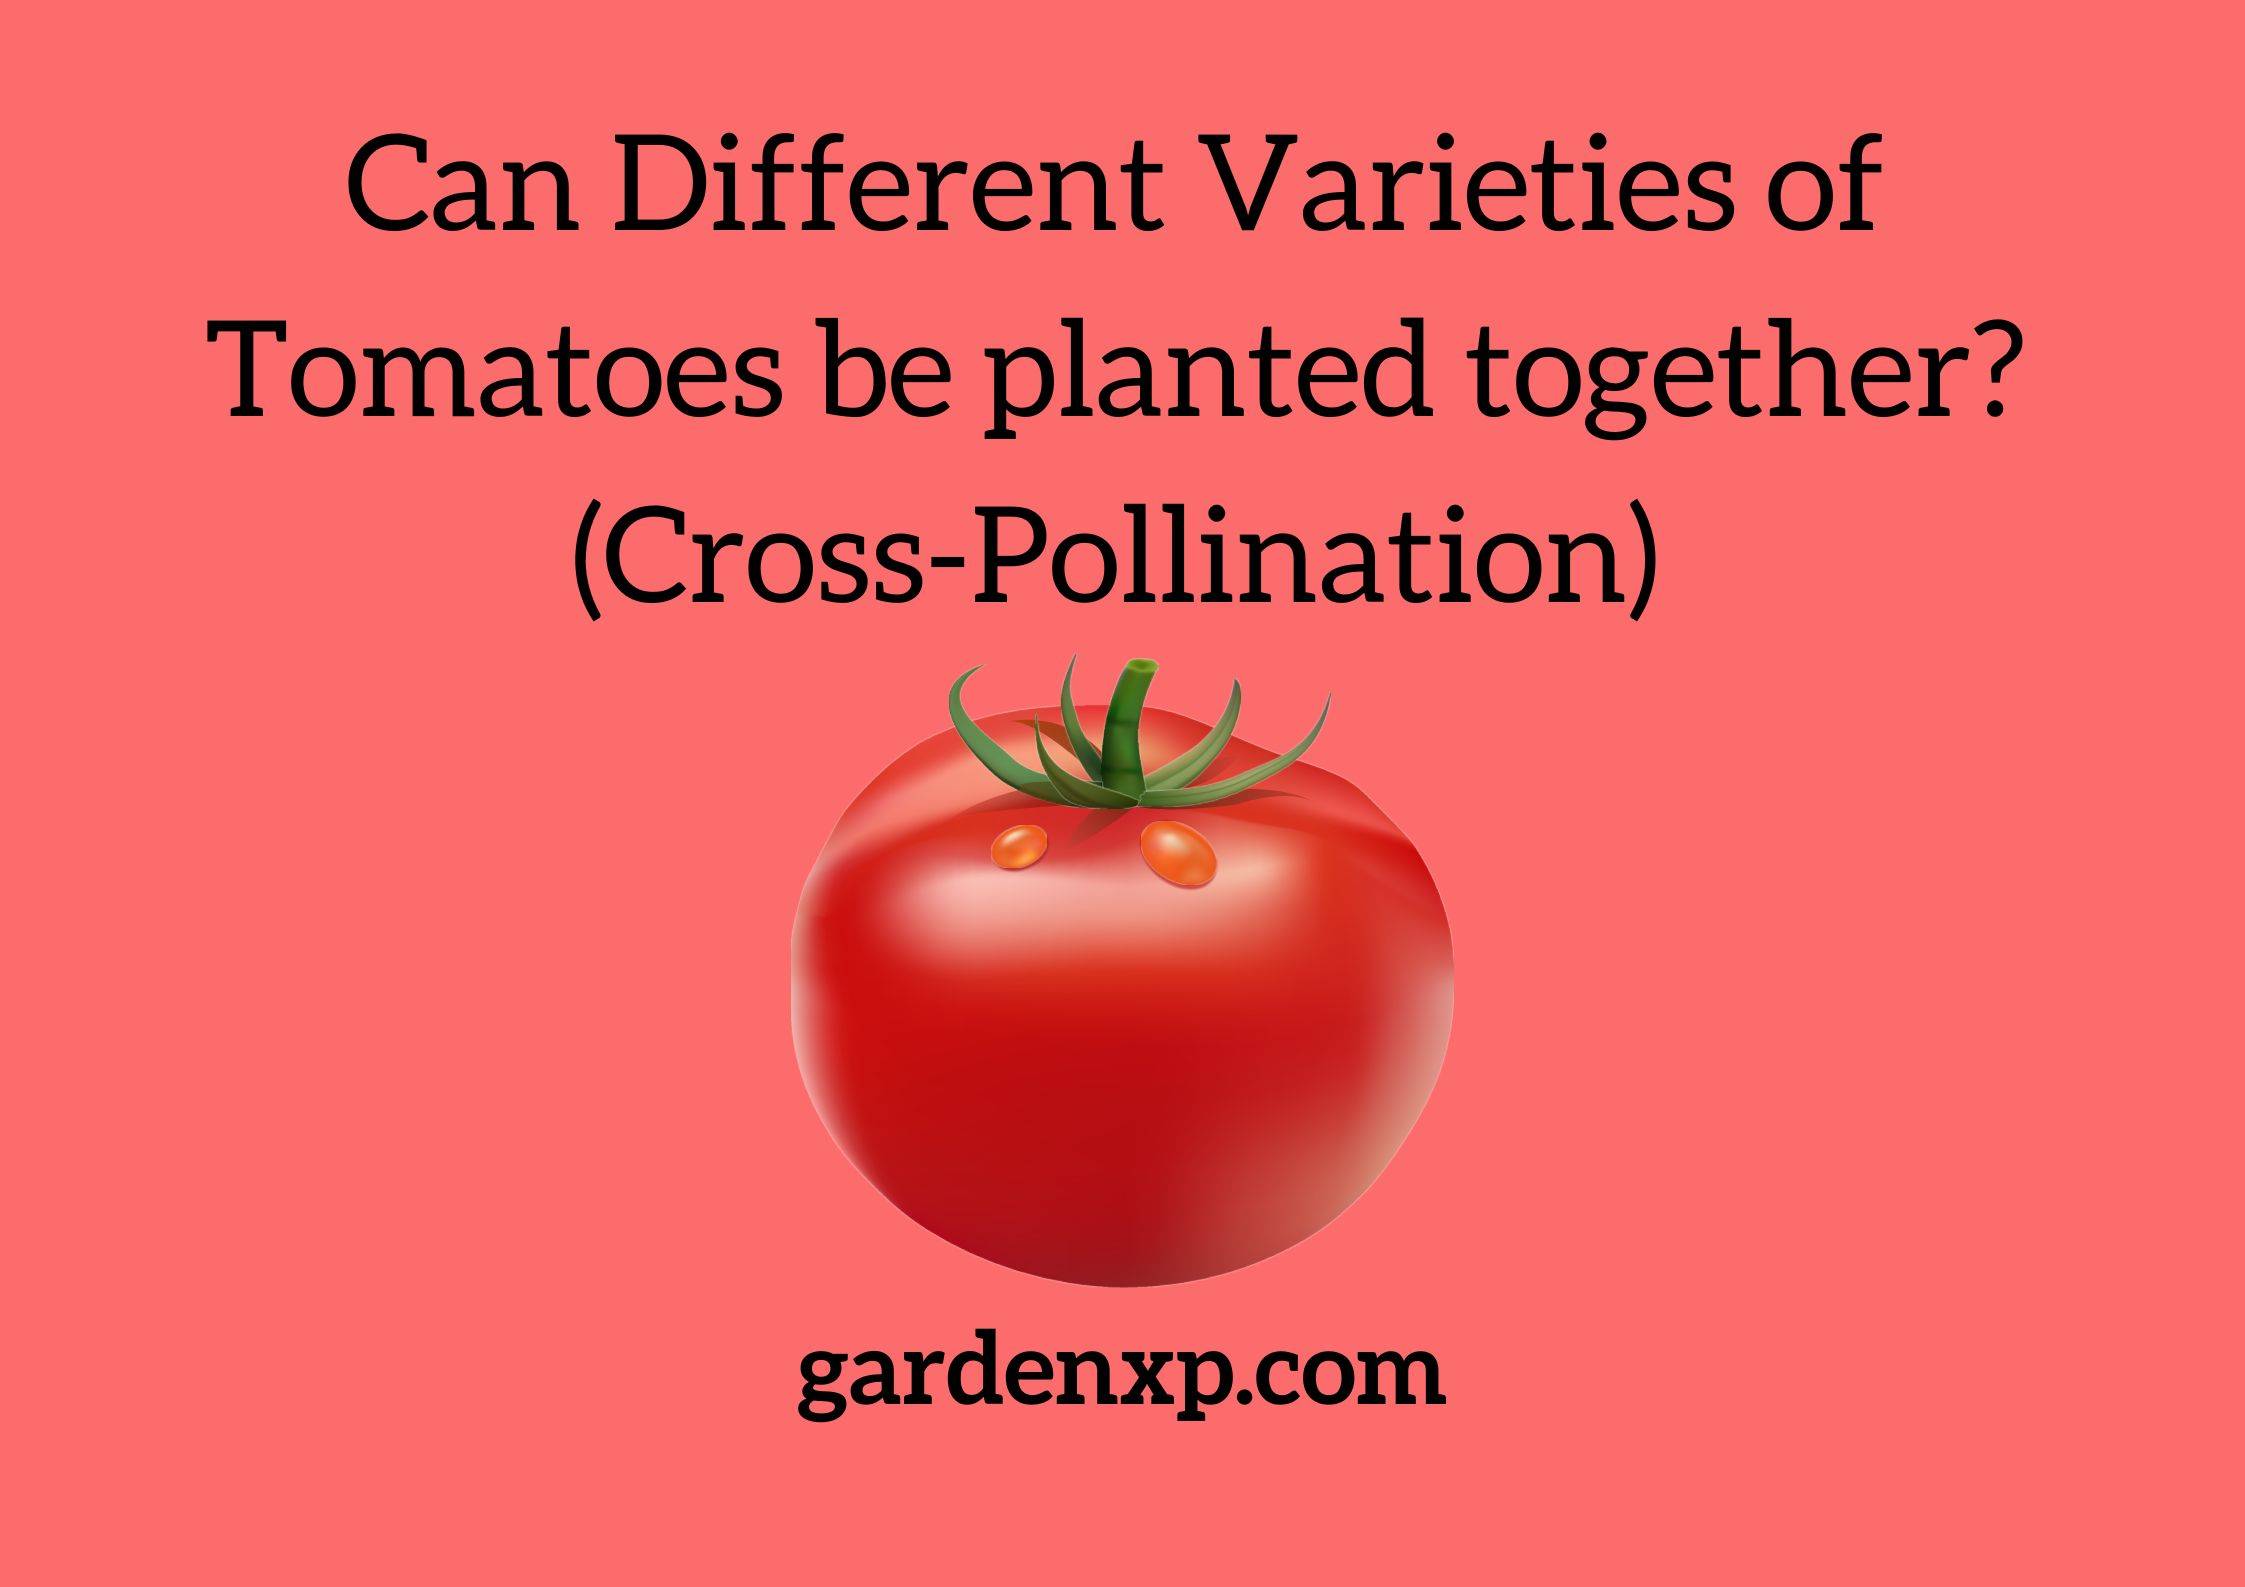 Can Different Varieties of Tomatoes Be Planted Together? (Cross-Pollination)